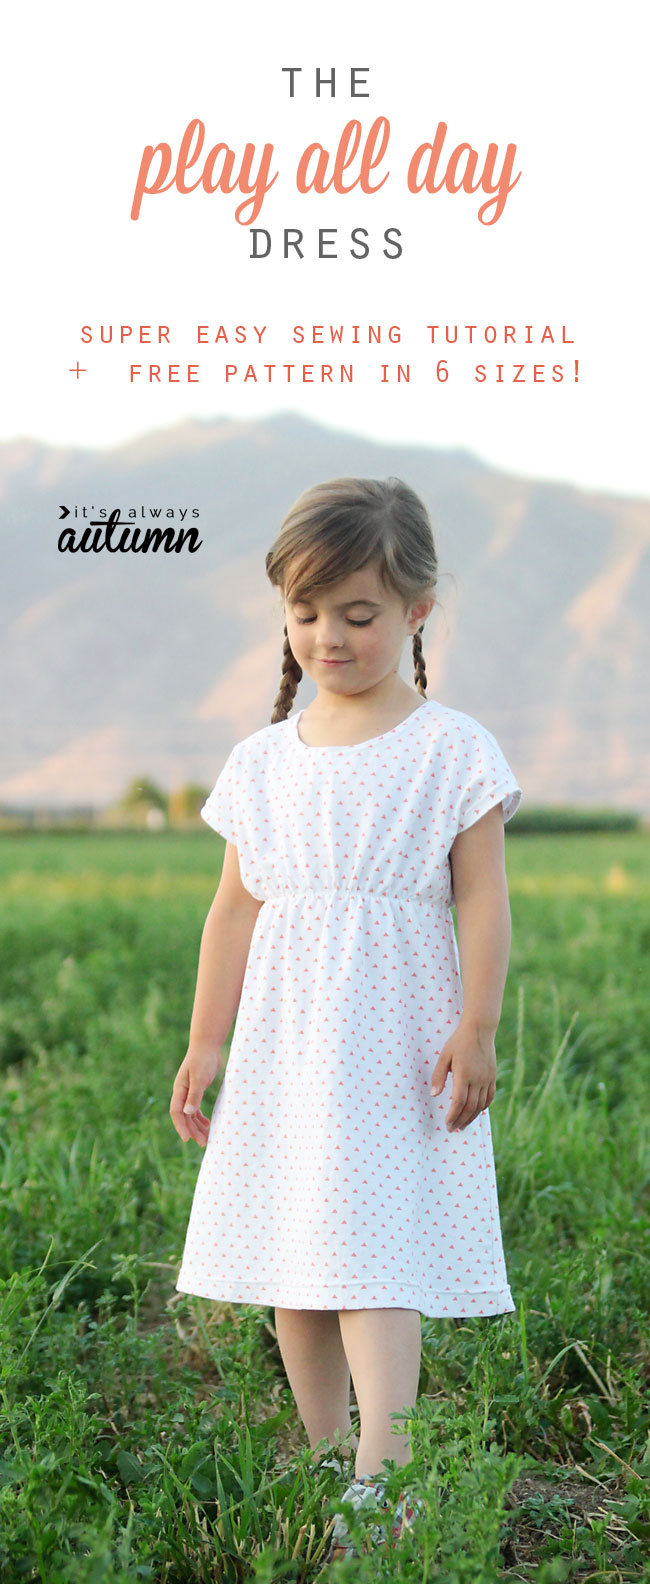 FREE PATTERN ALERT: 15 Free Girls Knit Dress Patterns | On the Cutting  Floor: Printable pdf sewing patterns and tutorials for women